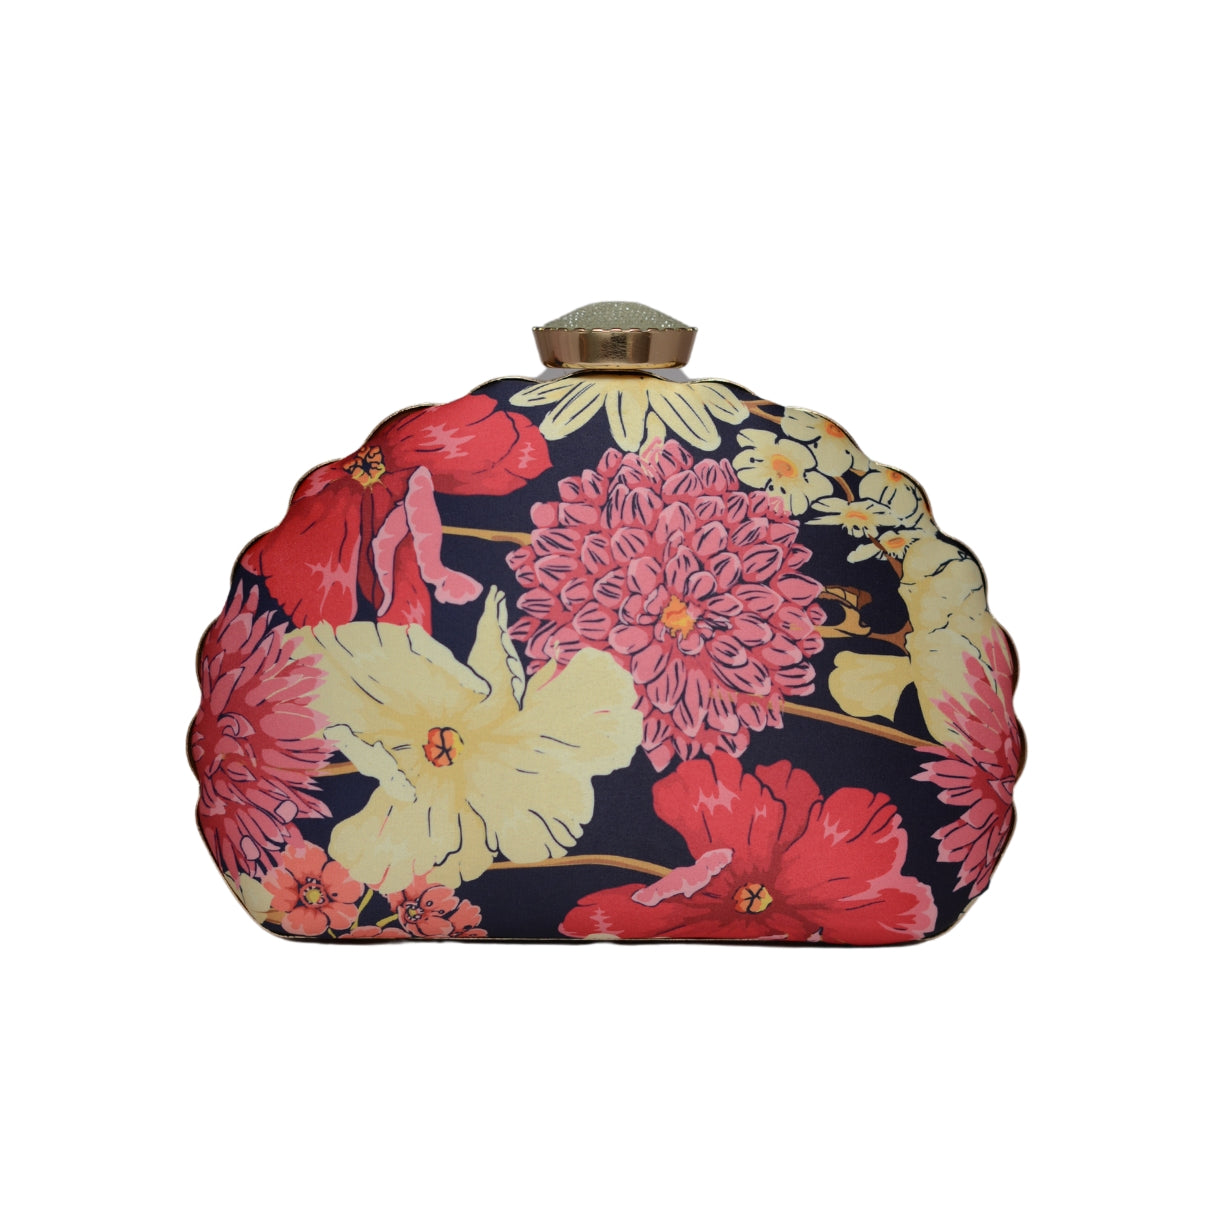 Artklim White And Red Flower Pritned D-shape Clutch